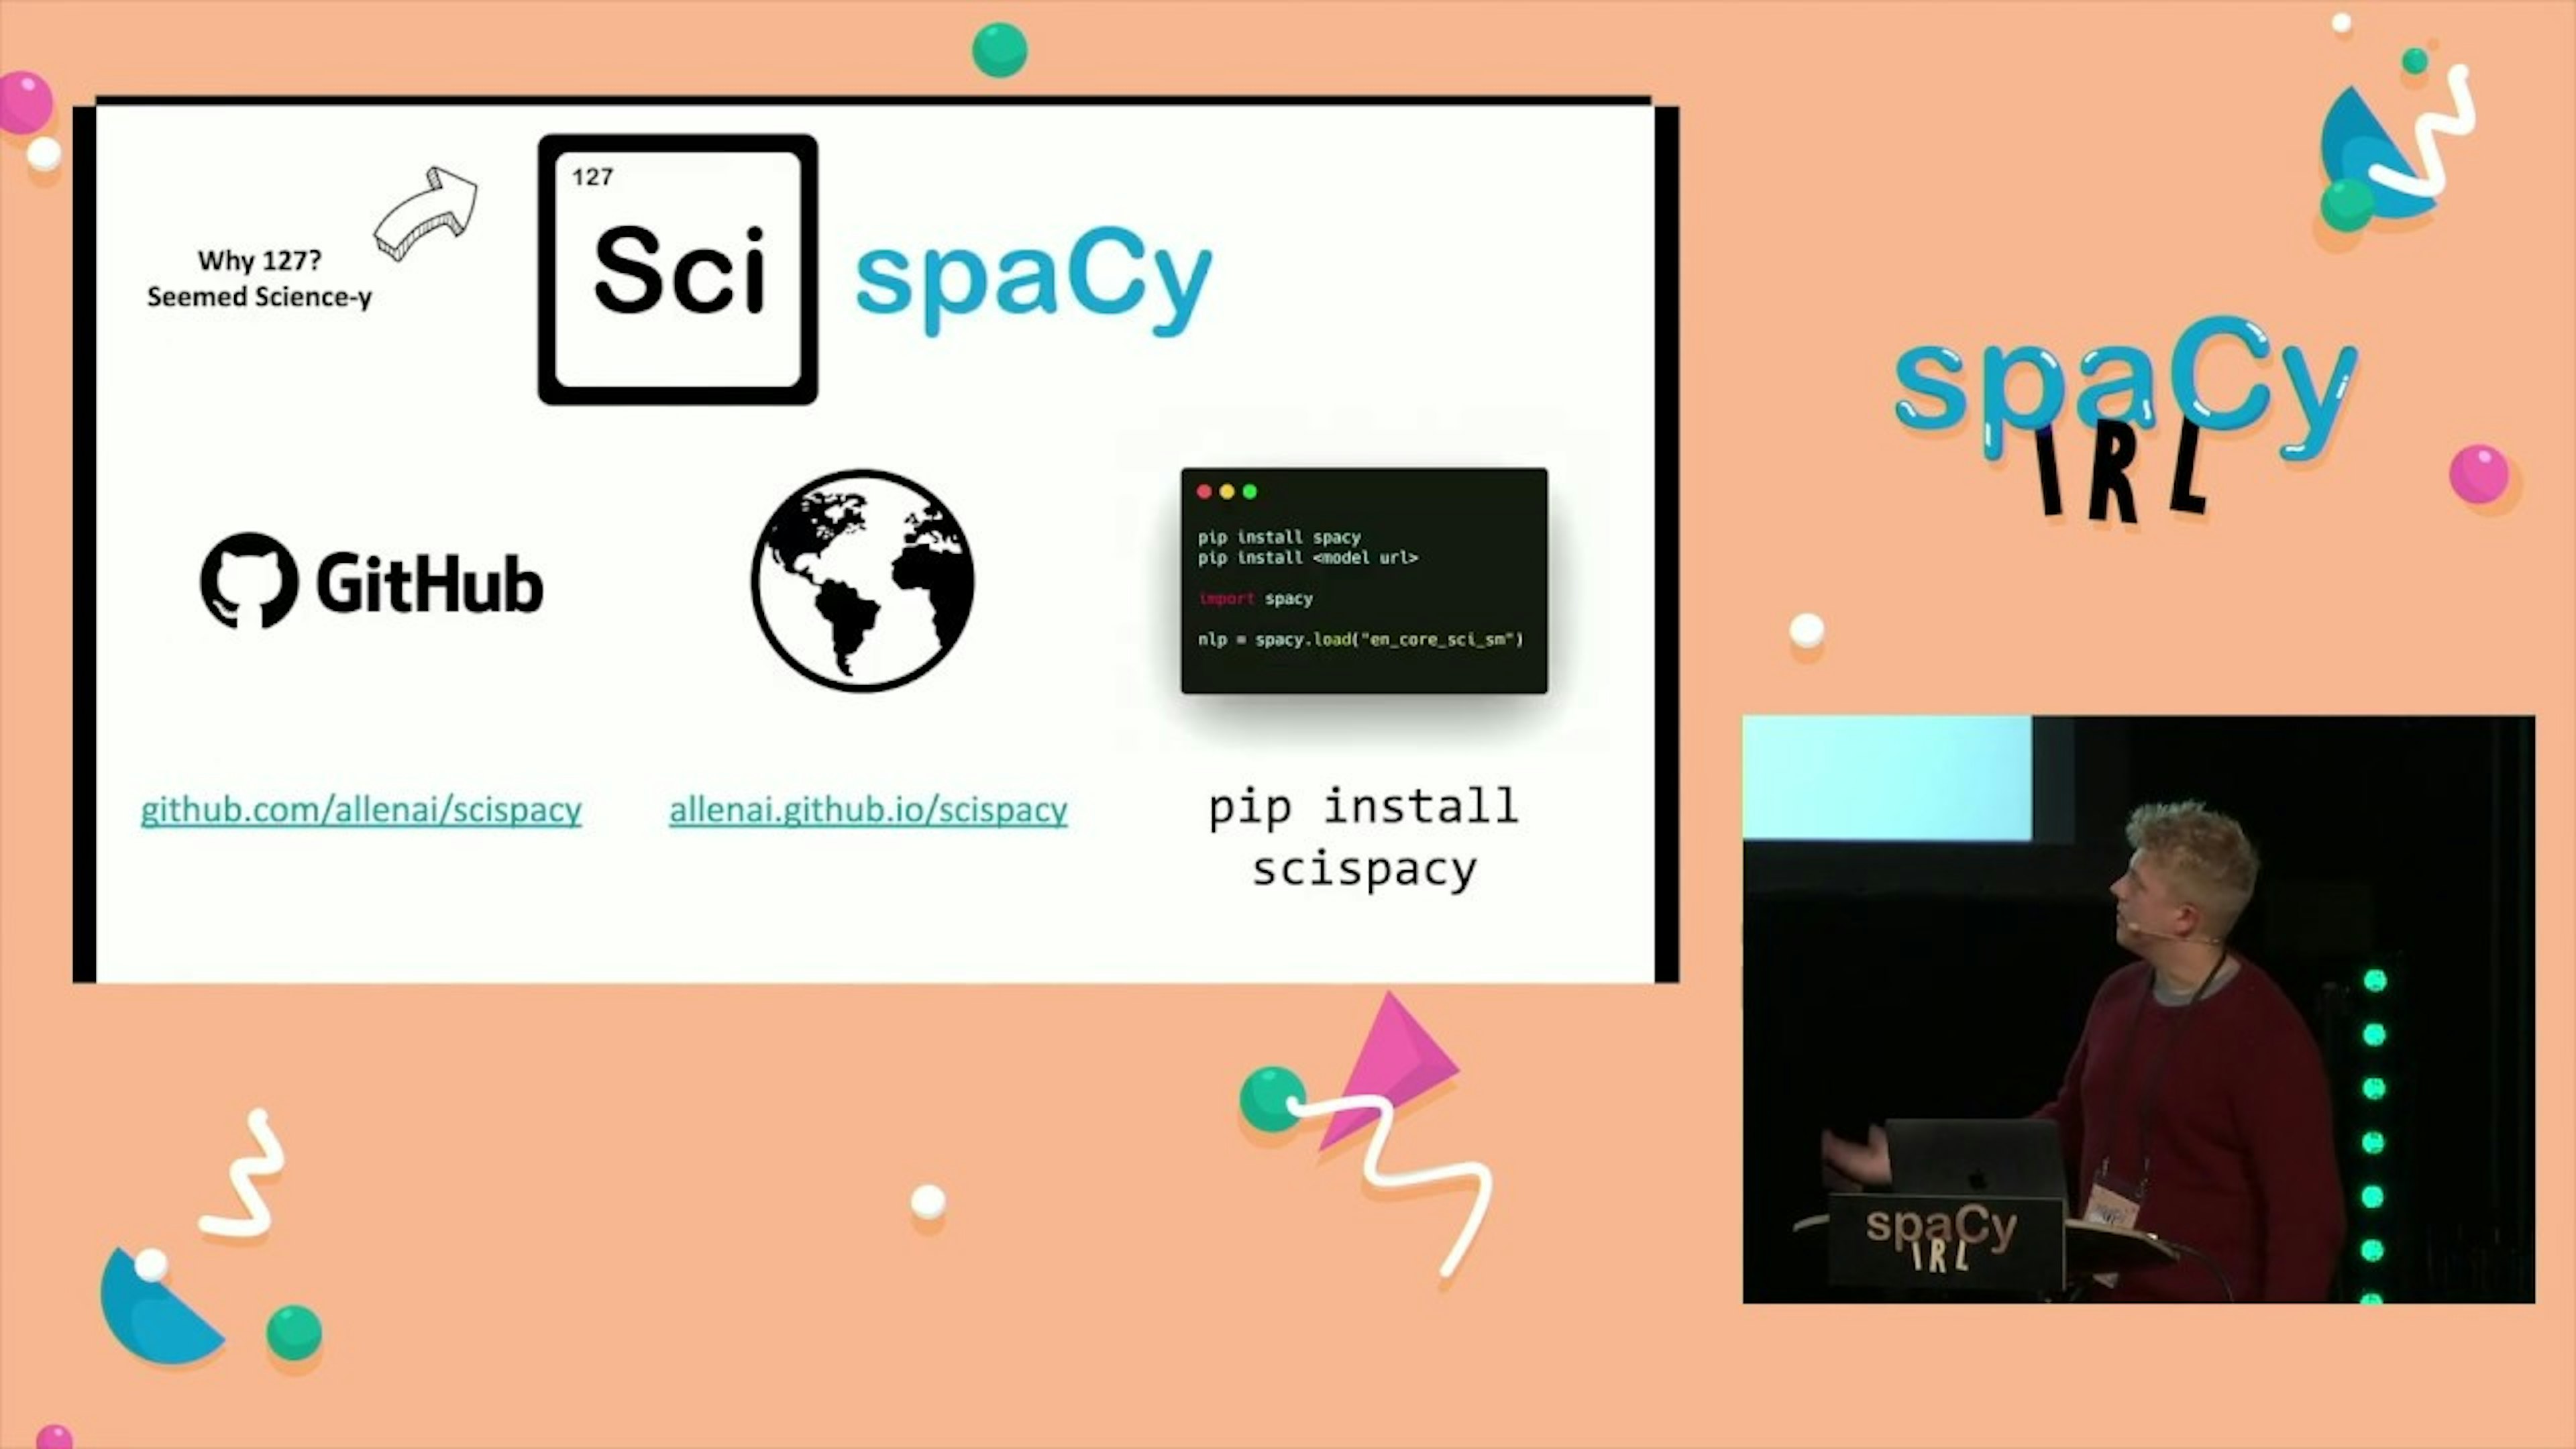 Mark Neumann: ScispaCy: A spaCy pipeline & models for scientific & biomedical text